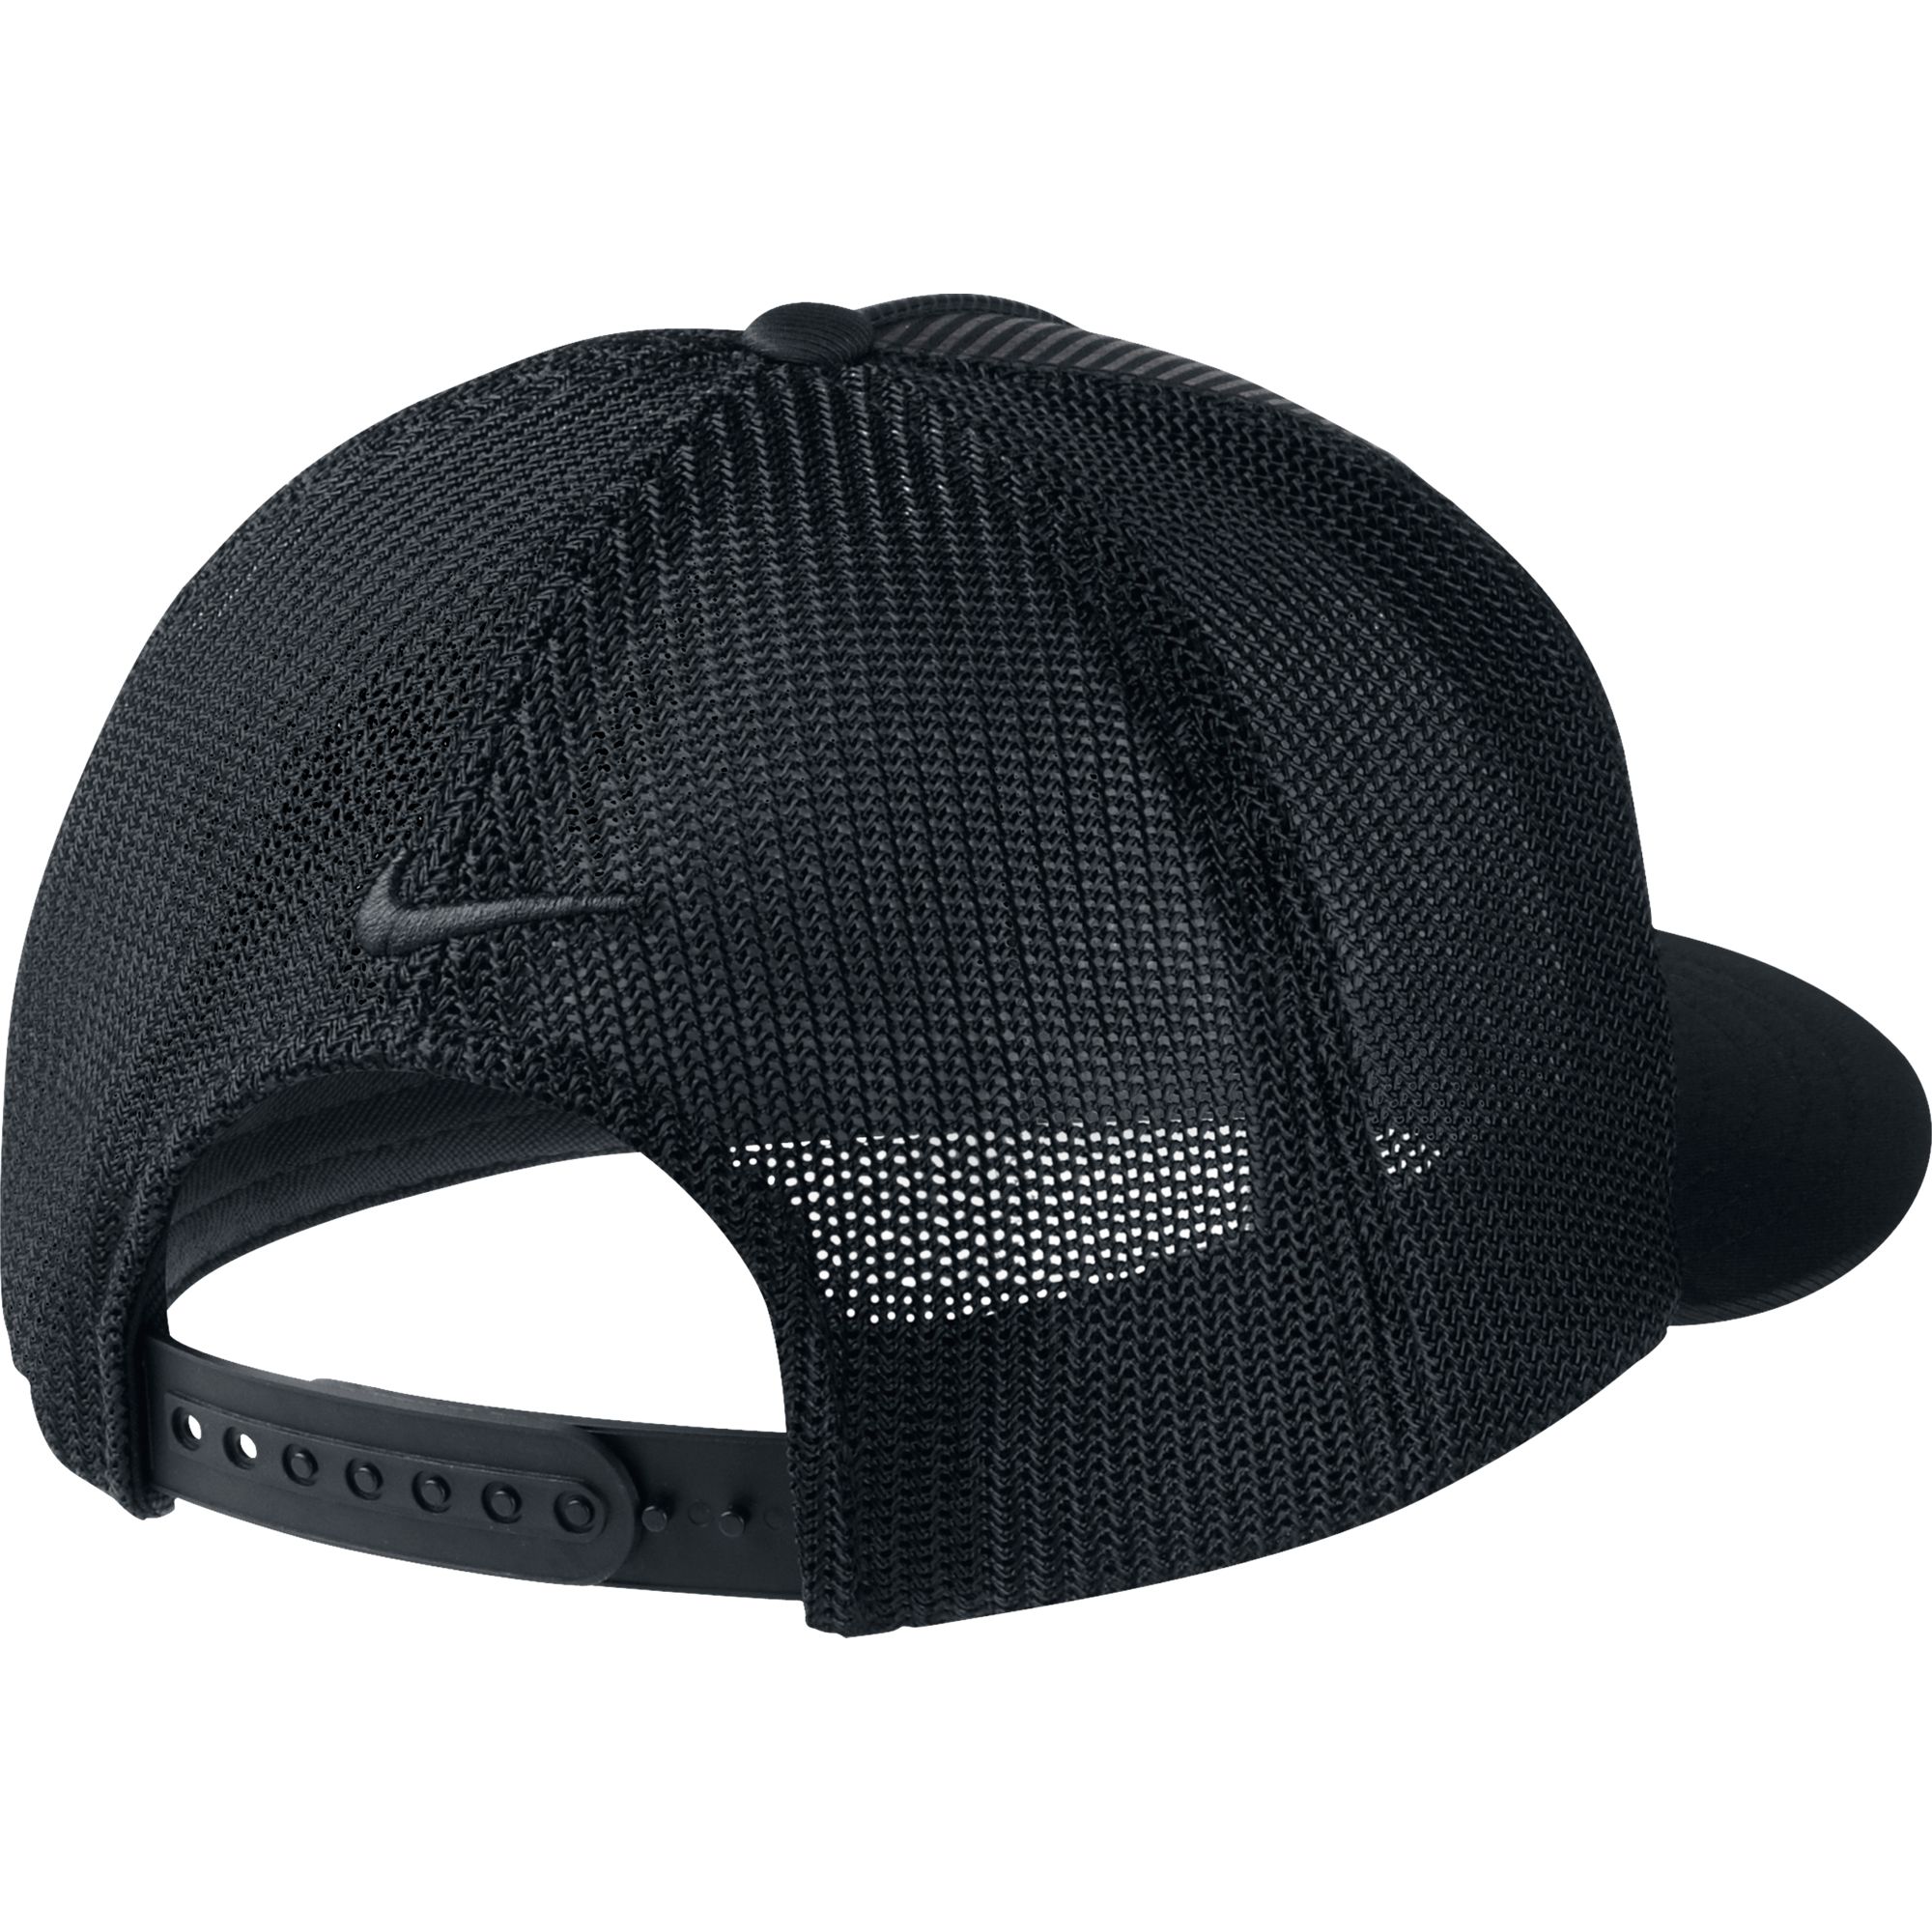 New 2014 Nike Graphic Snap Back Flat Bill Hat/Cap COLOR: Black SIZE ...